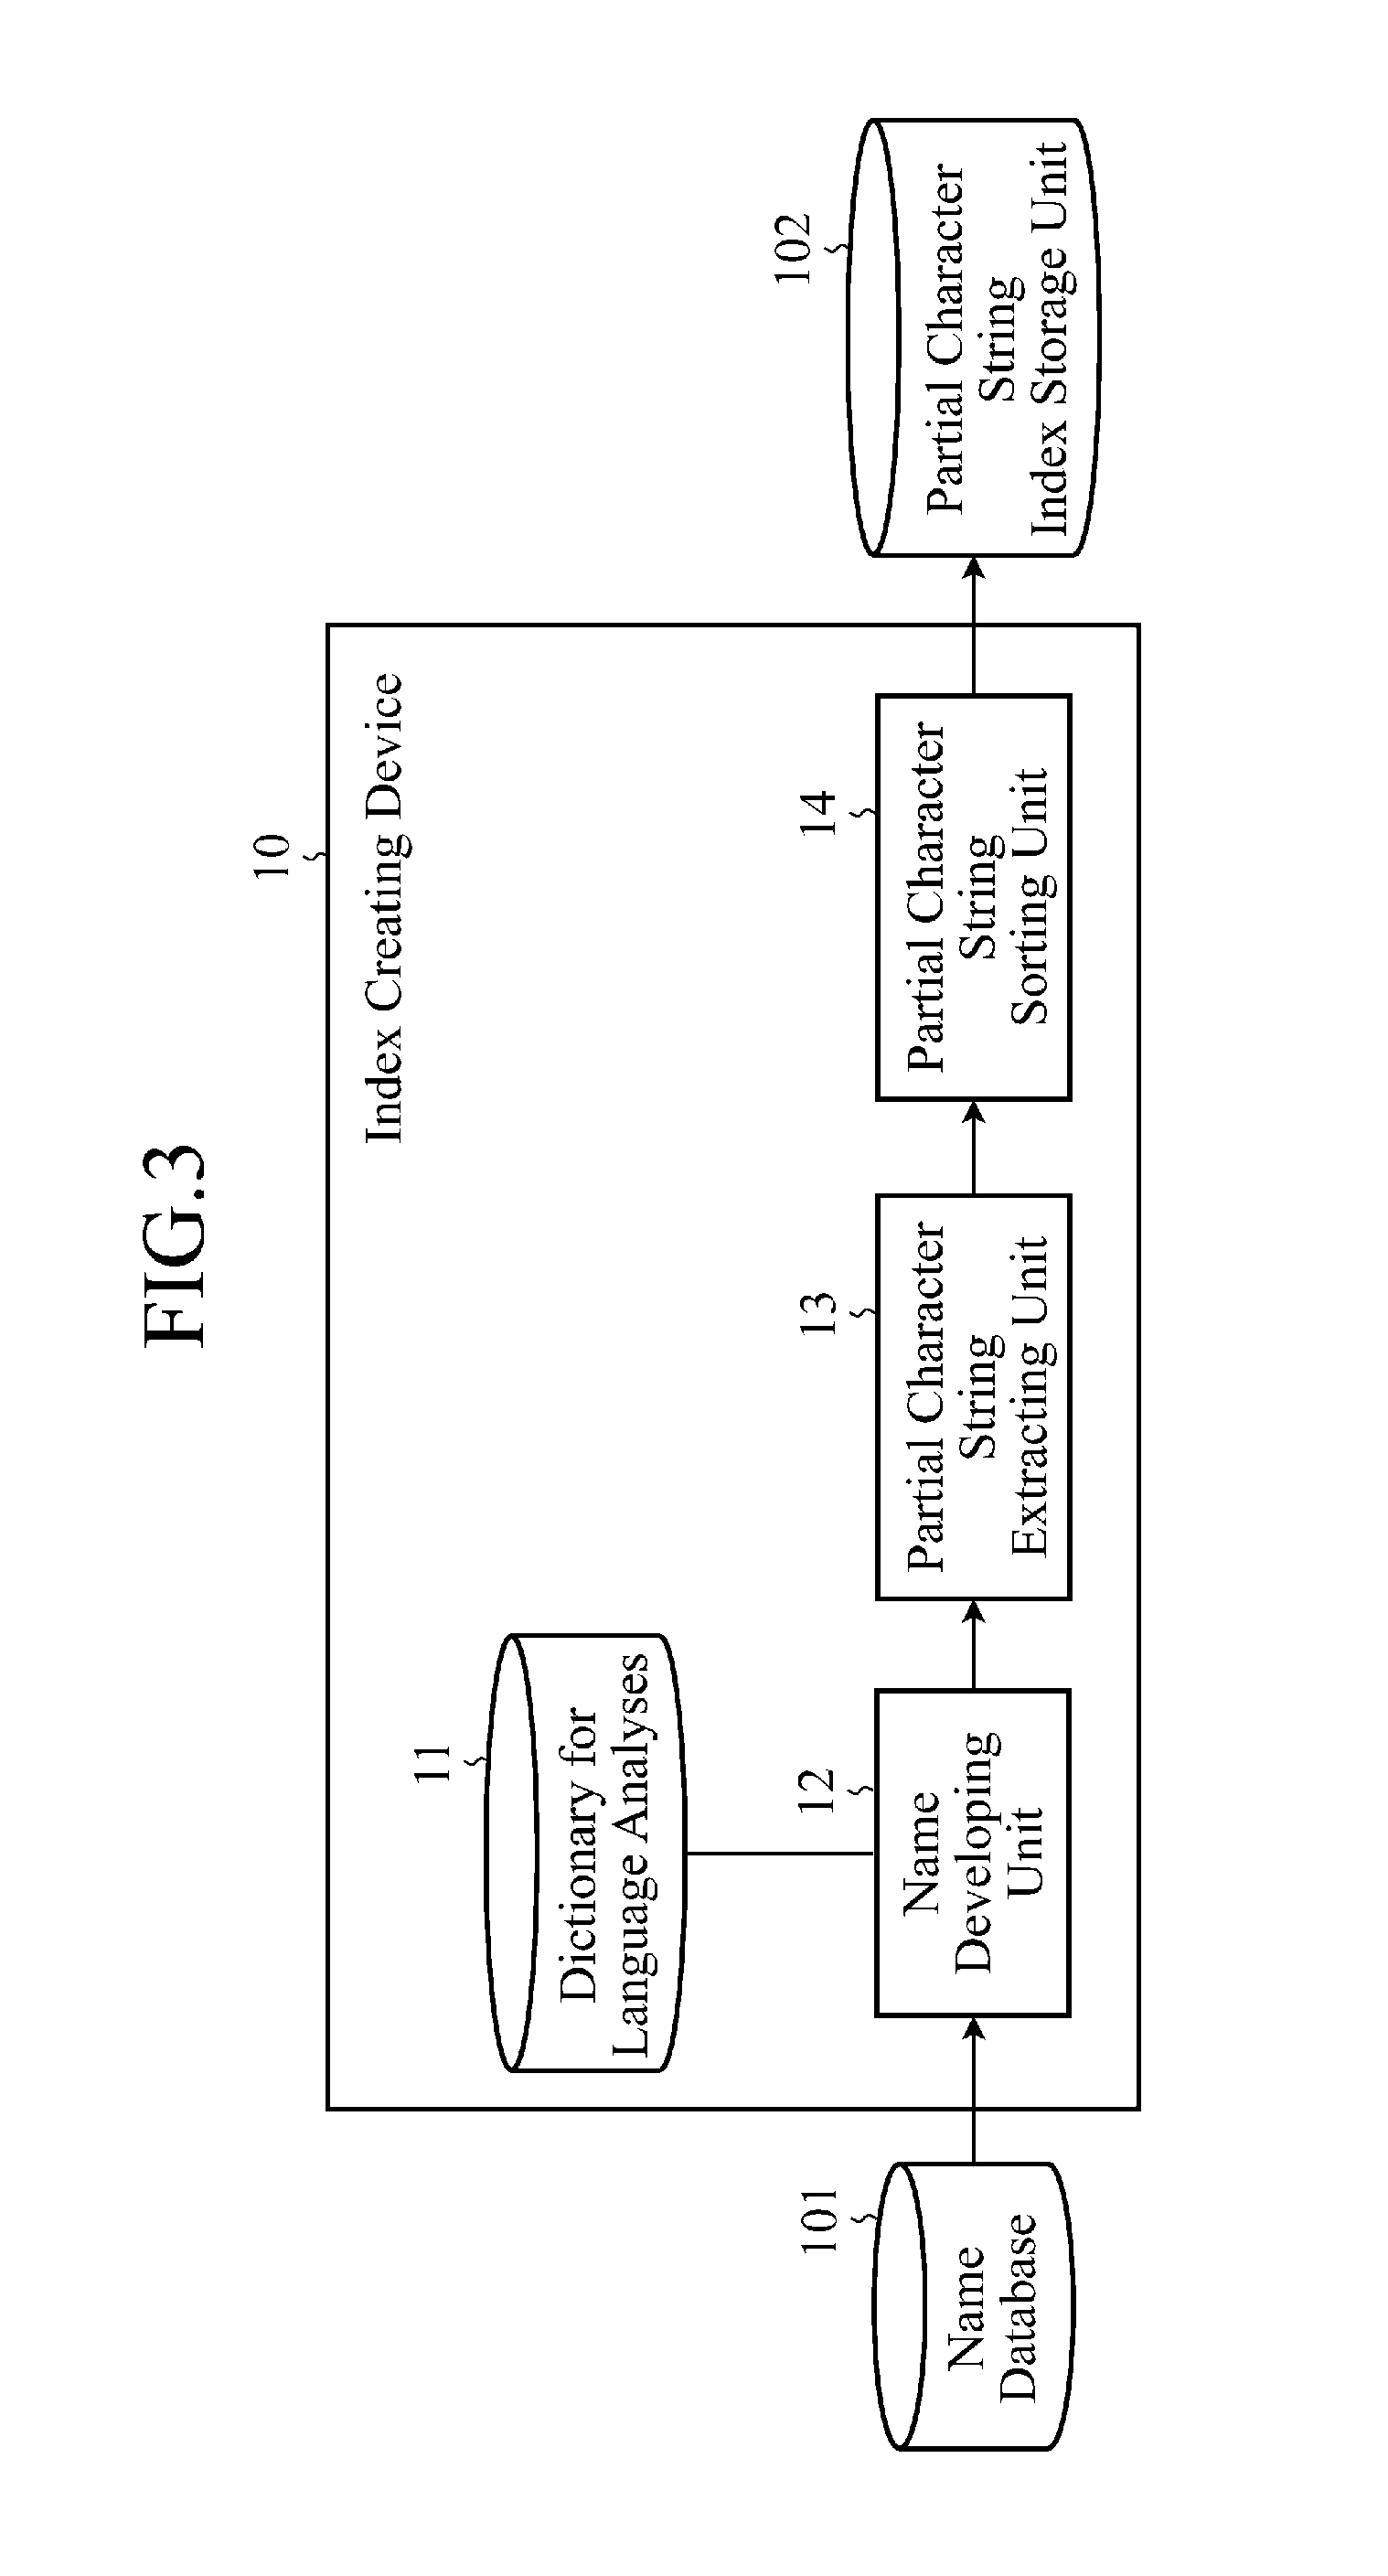 Search device, search index creating device, and search system